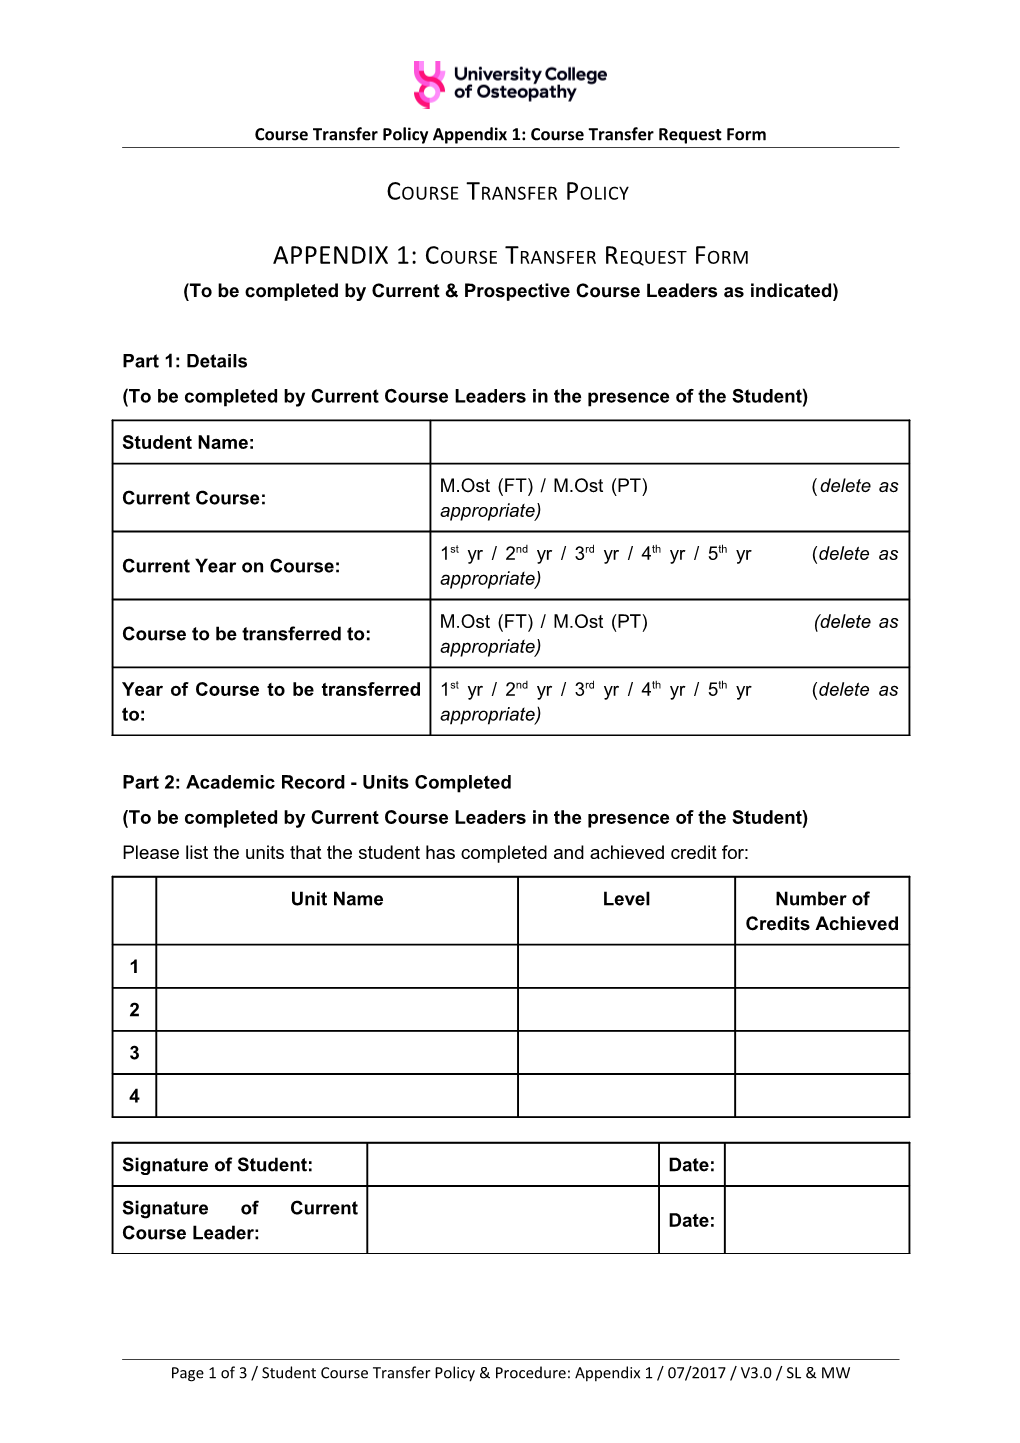 Course Transfer Policy Appendix 1: Course Transfer Request Form